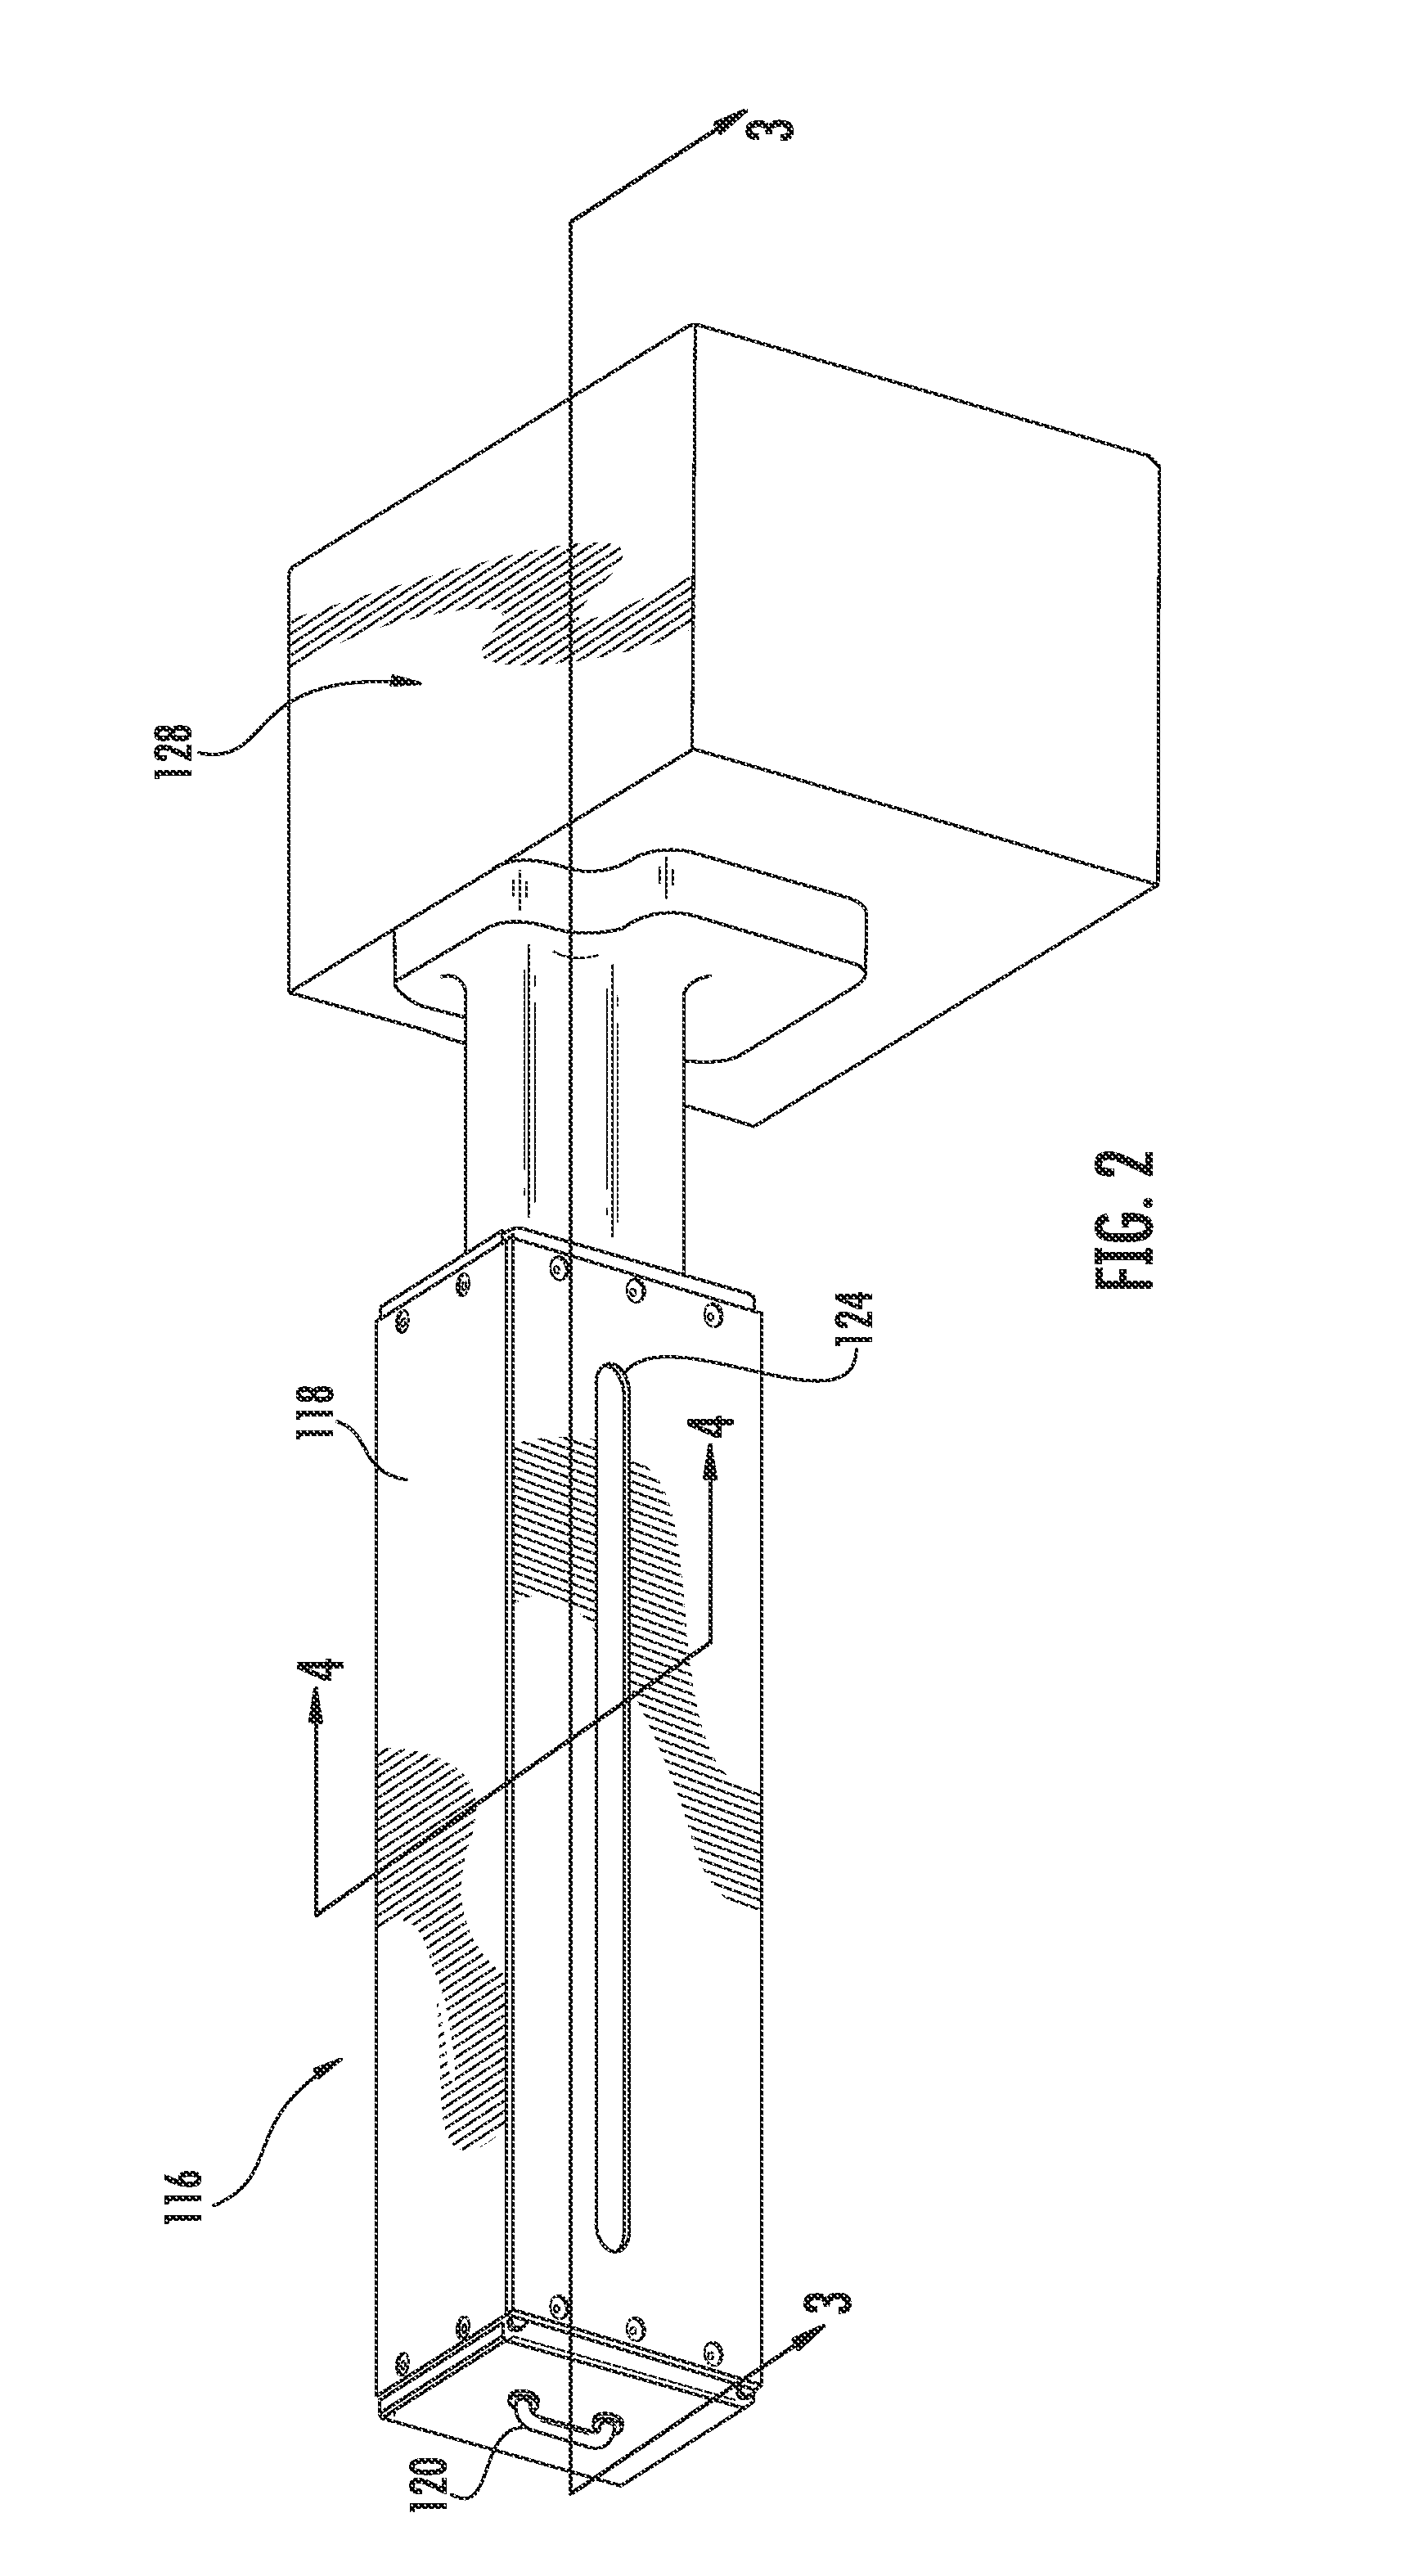 Inductively coupled plasma flood gun using an immersed low inductance fr coil and multicusp magnetic arrangement